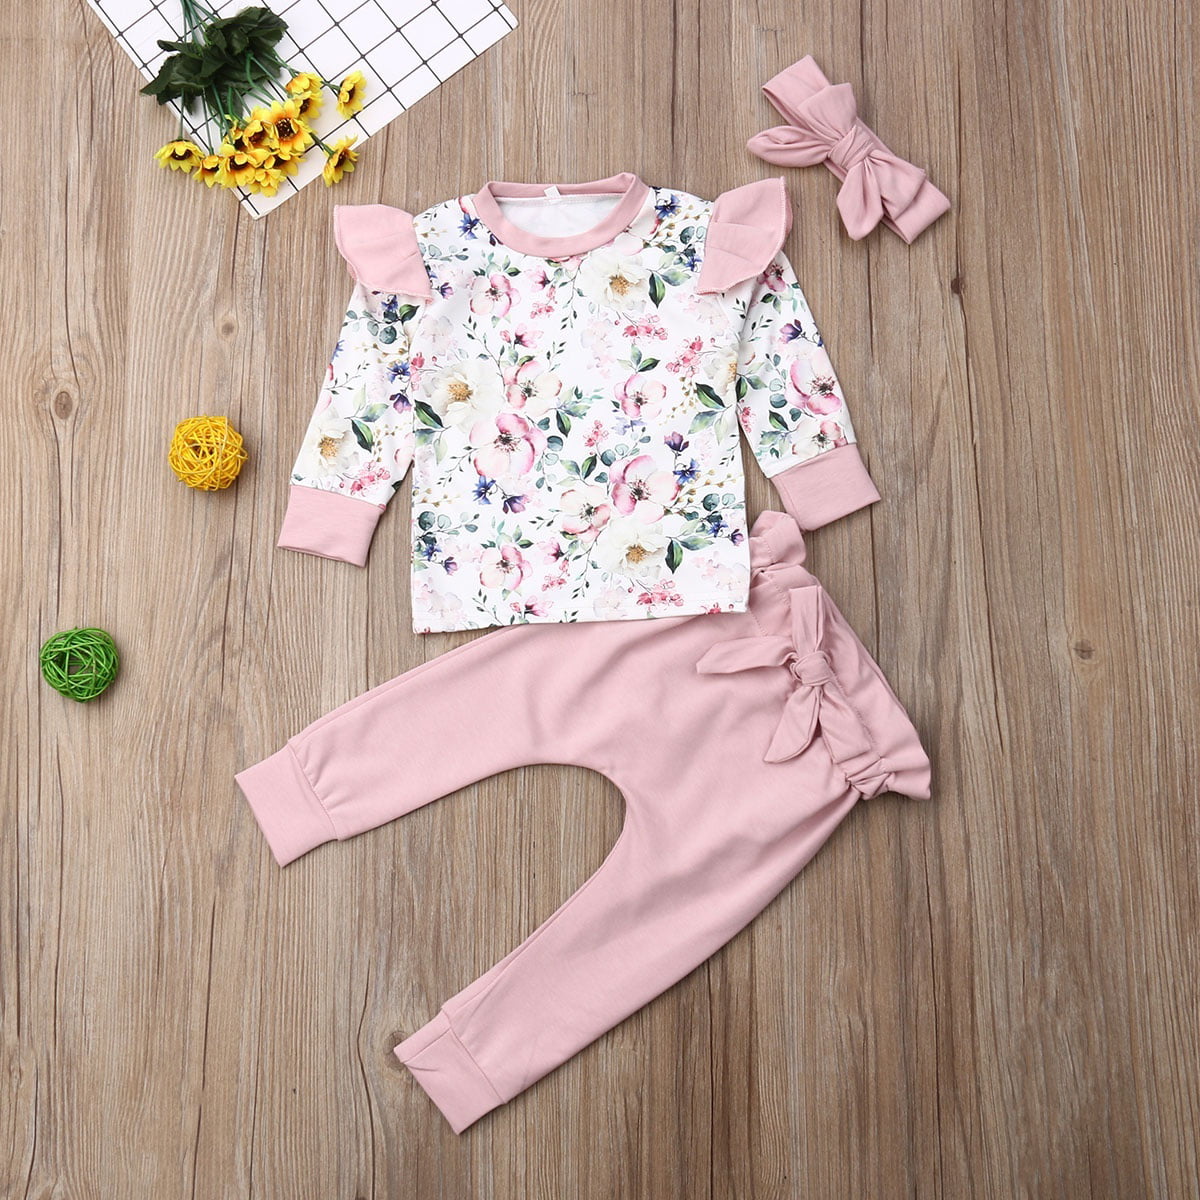 Baby Girl Clothing Set Pullover Set Sweet Infant Baby Girl Clothes Long ...